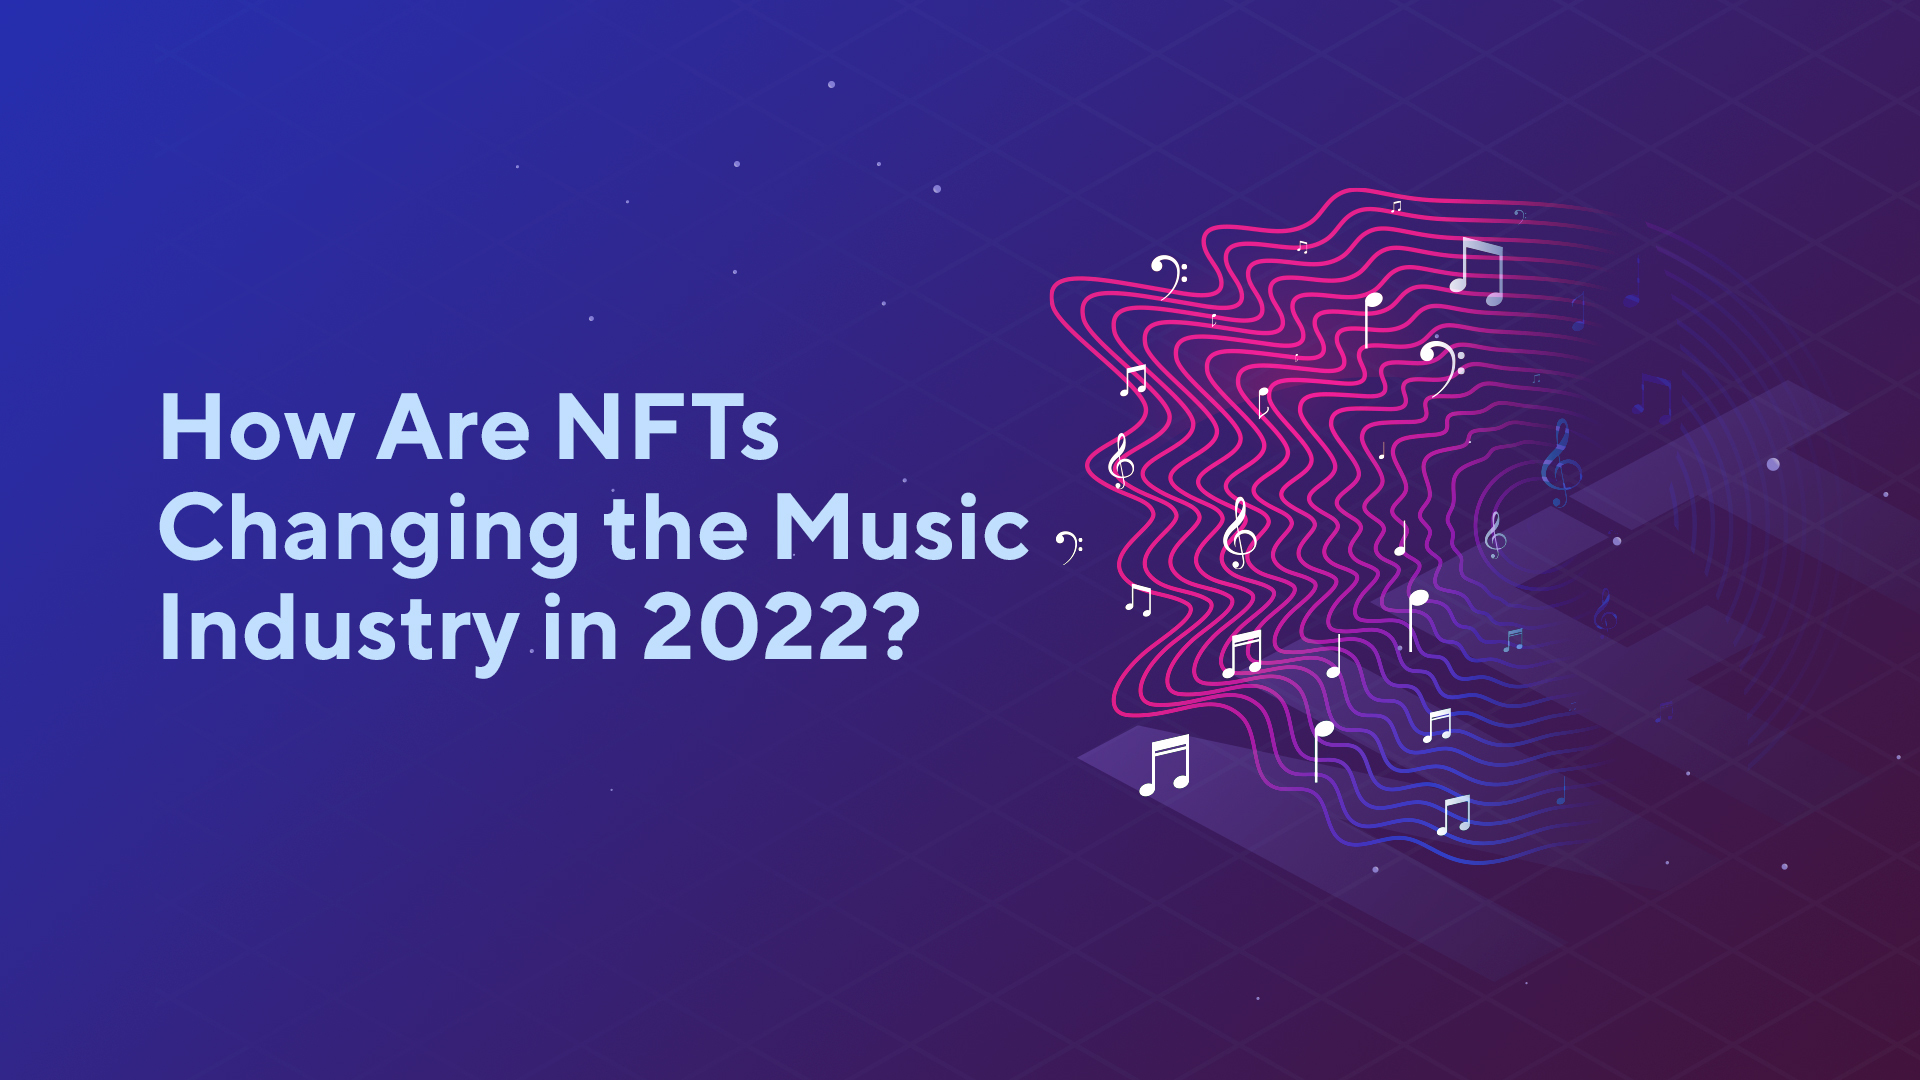 How Are NFTs Changing the Music Industry in 2022?